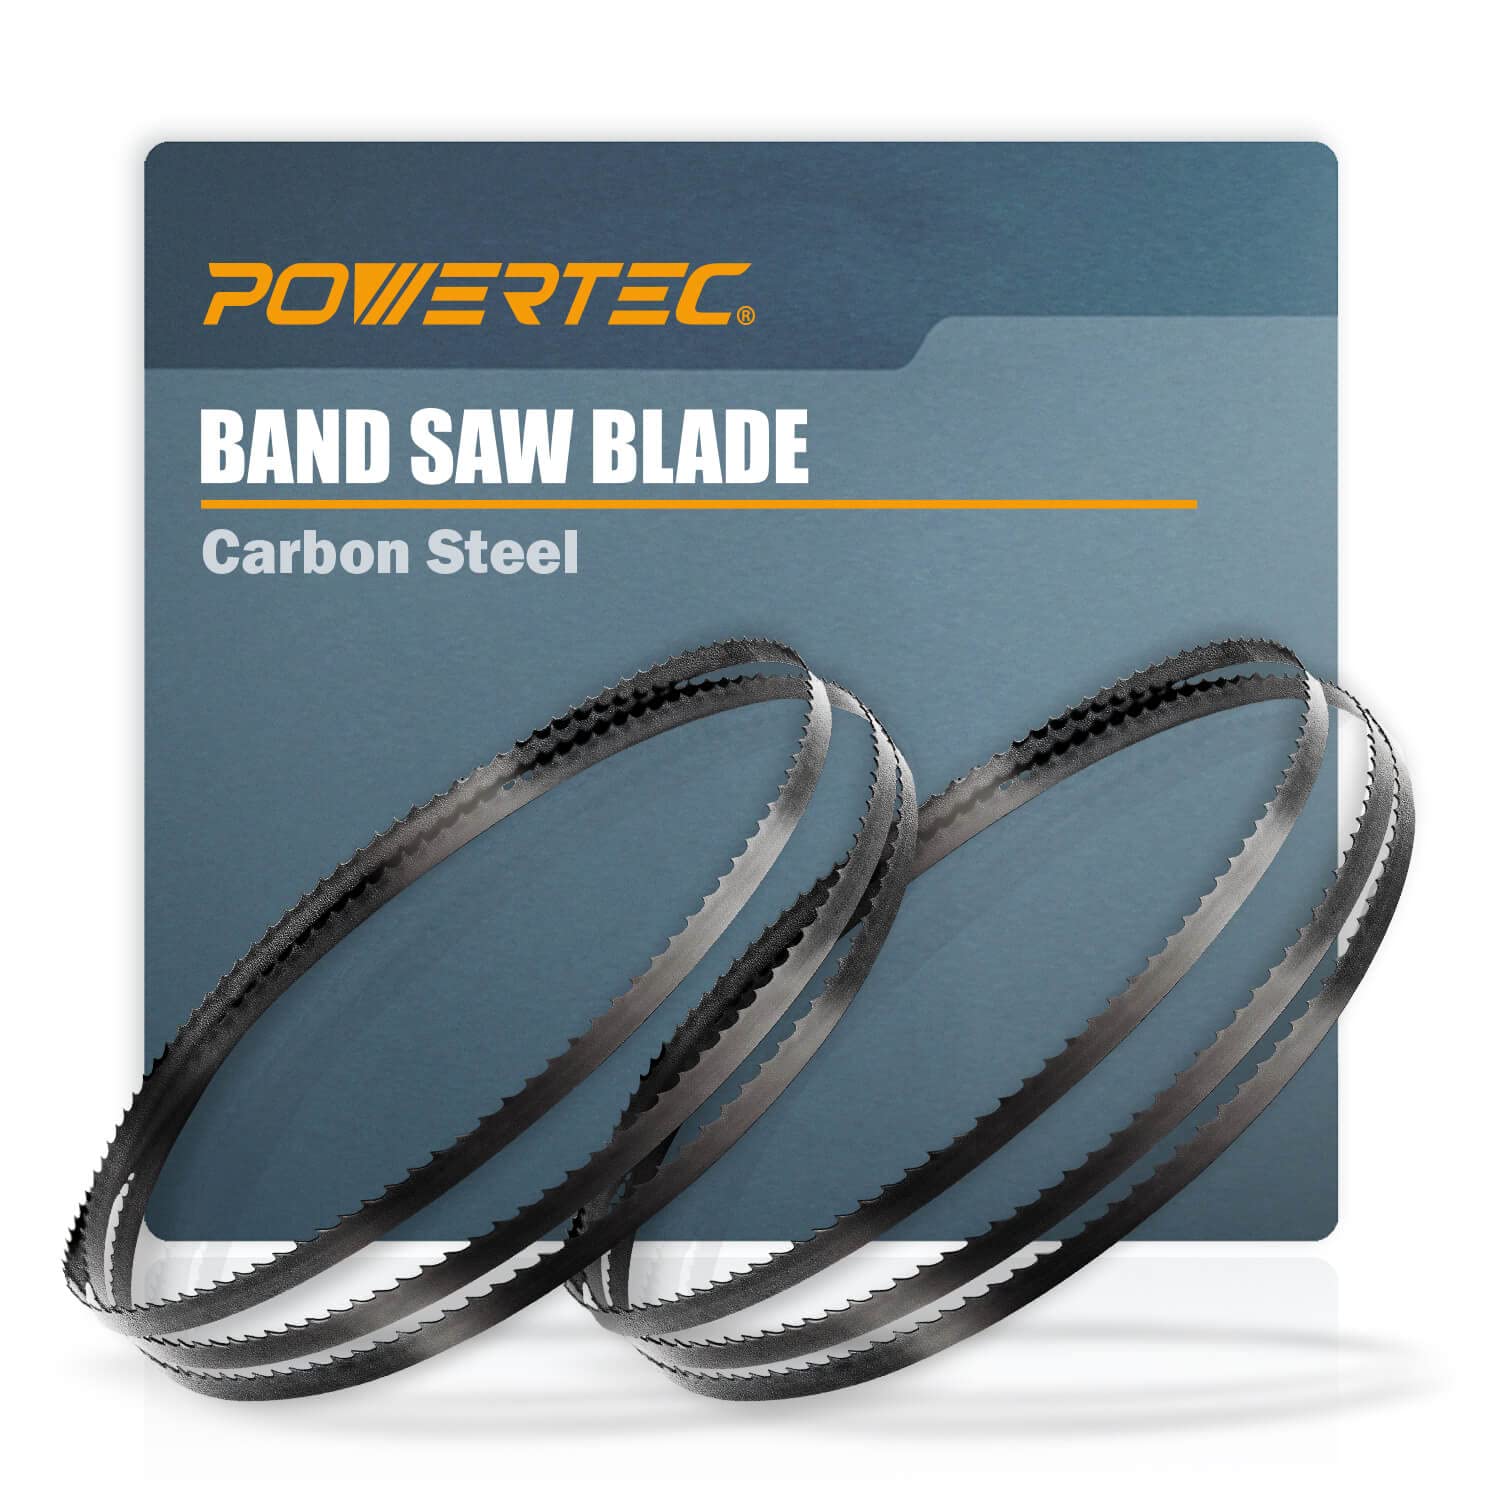 POWERTEC 93-1/2 Inch Bandsaw Blades, 1/8" x 14 TPI Band Saw Blades for Delta, Grizzly, Rikon, Sears Craftsman, JET, Shop Fox and Rockwell 14" Band Saw for Woodworking, 2 pack (13118-P2)